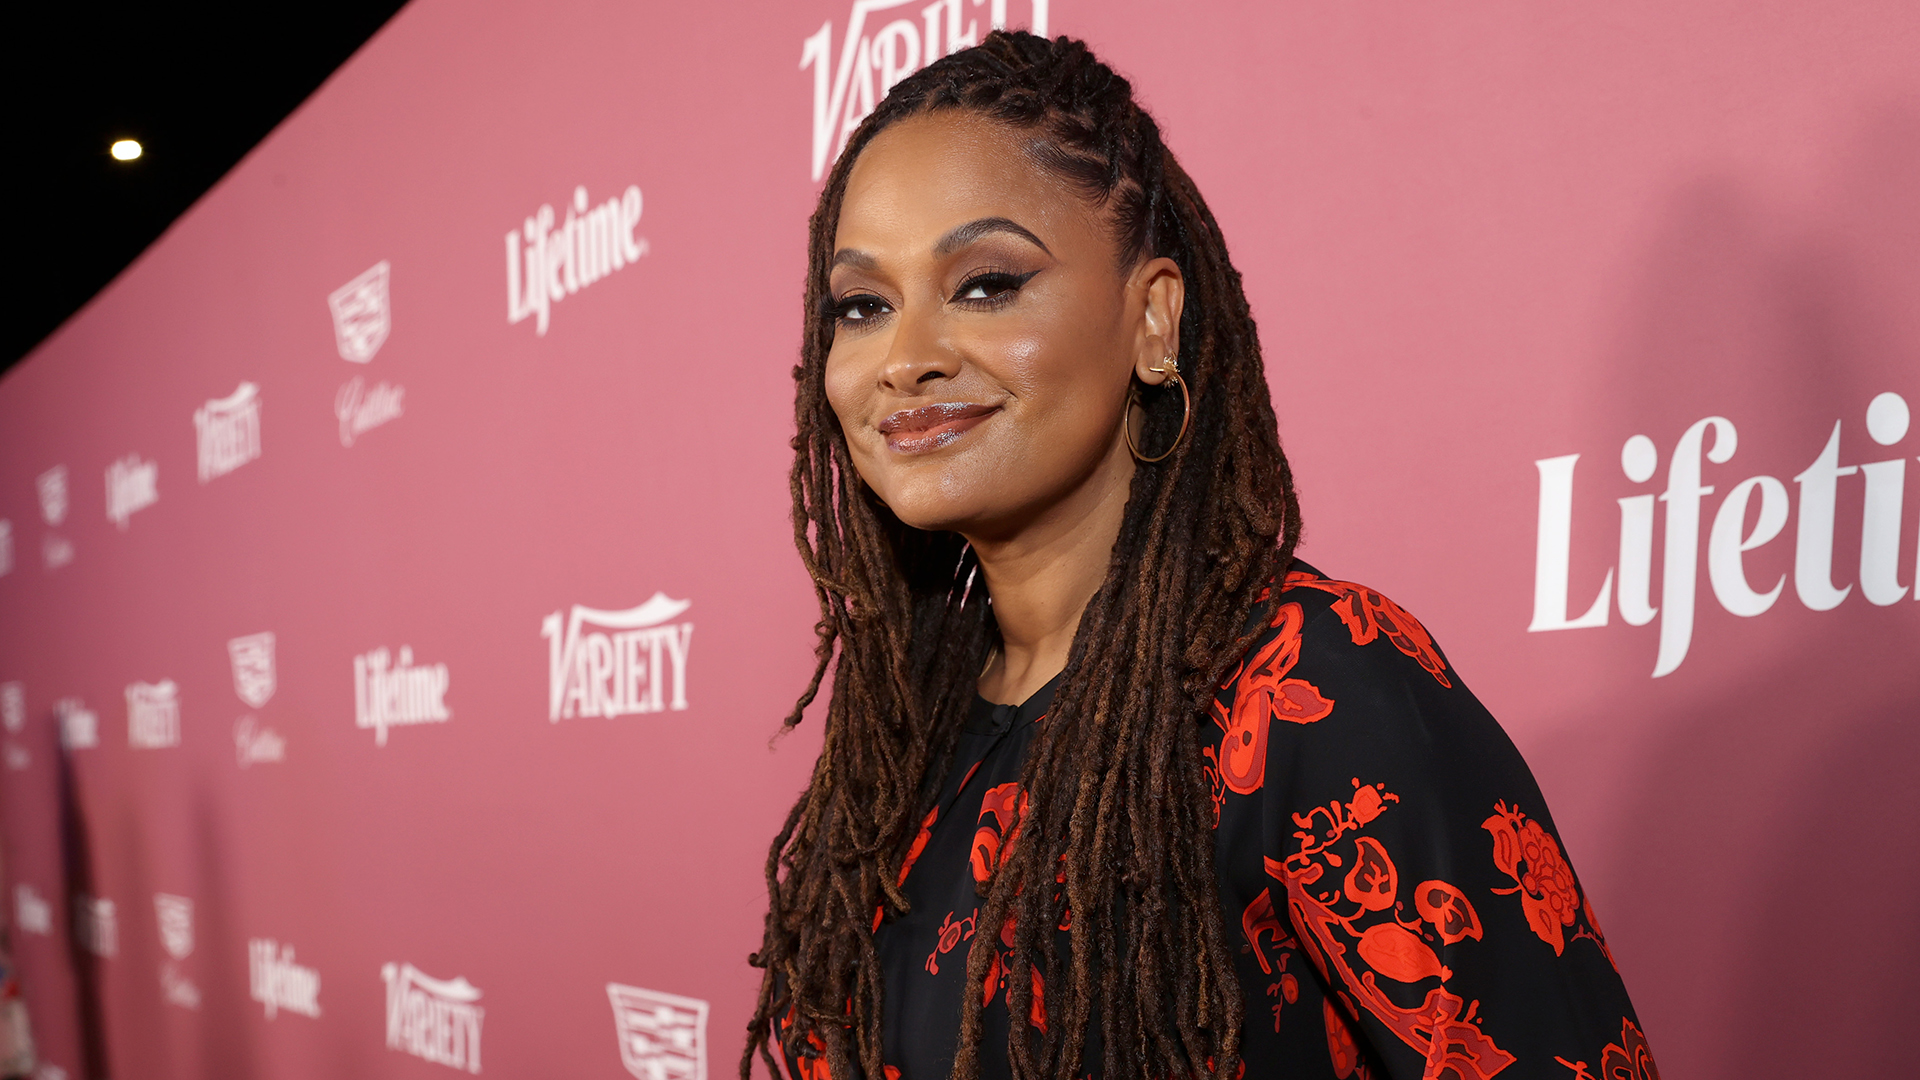 EXCLUSIVE: Ava DuVernay Talks About Our Differences Through The Lens Of Culture, Family, And Love With New Show "Home Sweet Home"